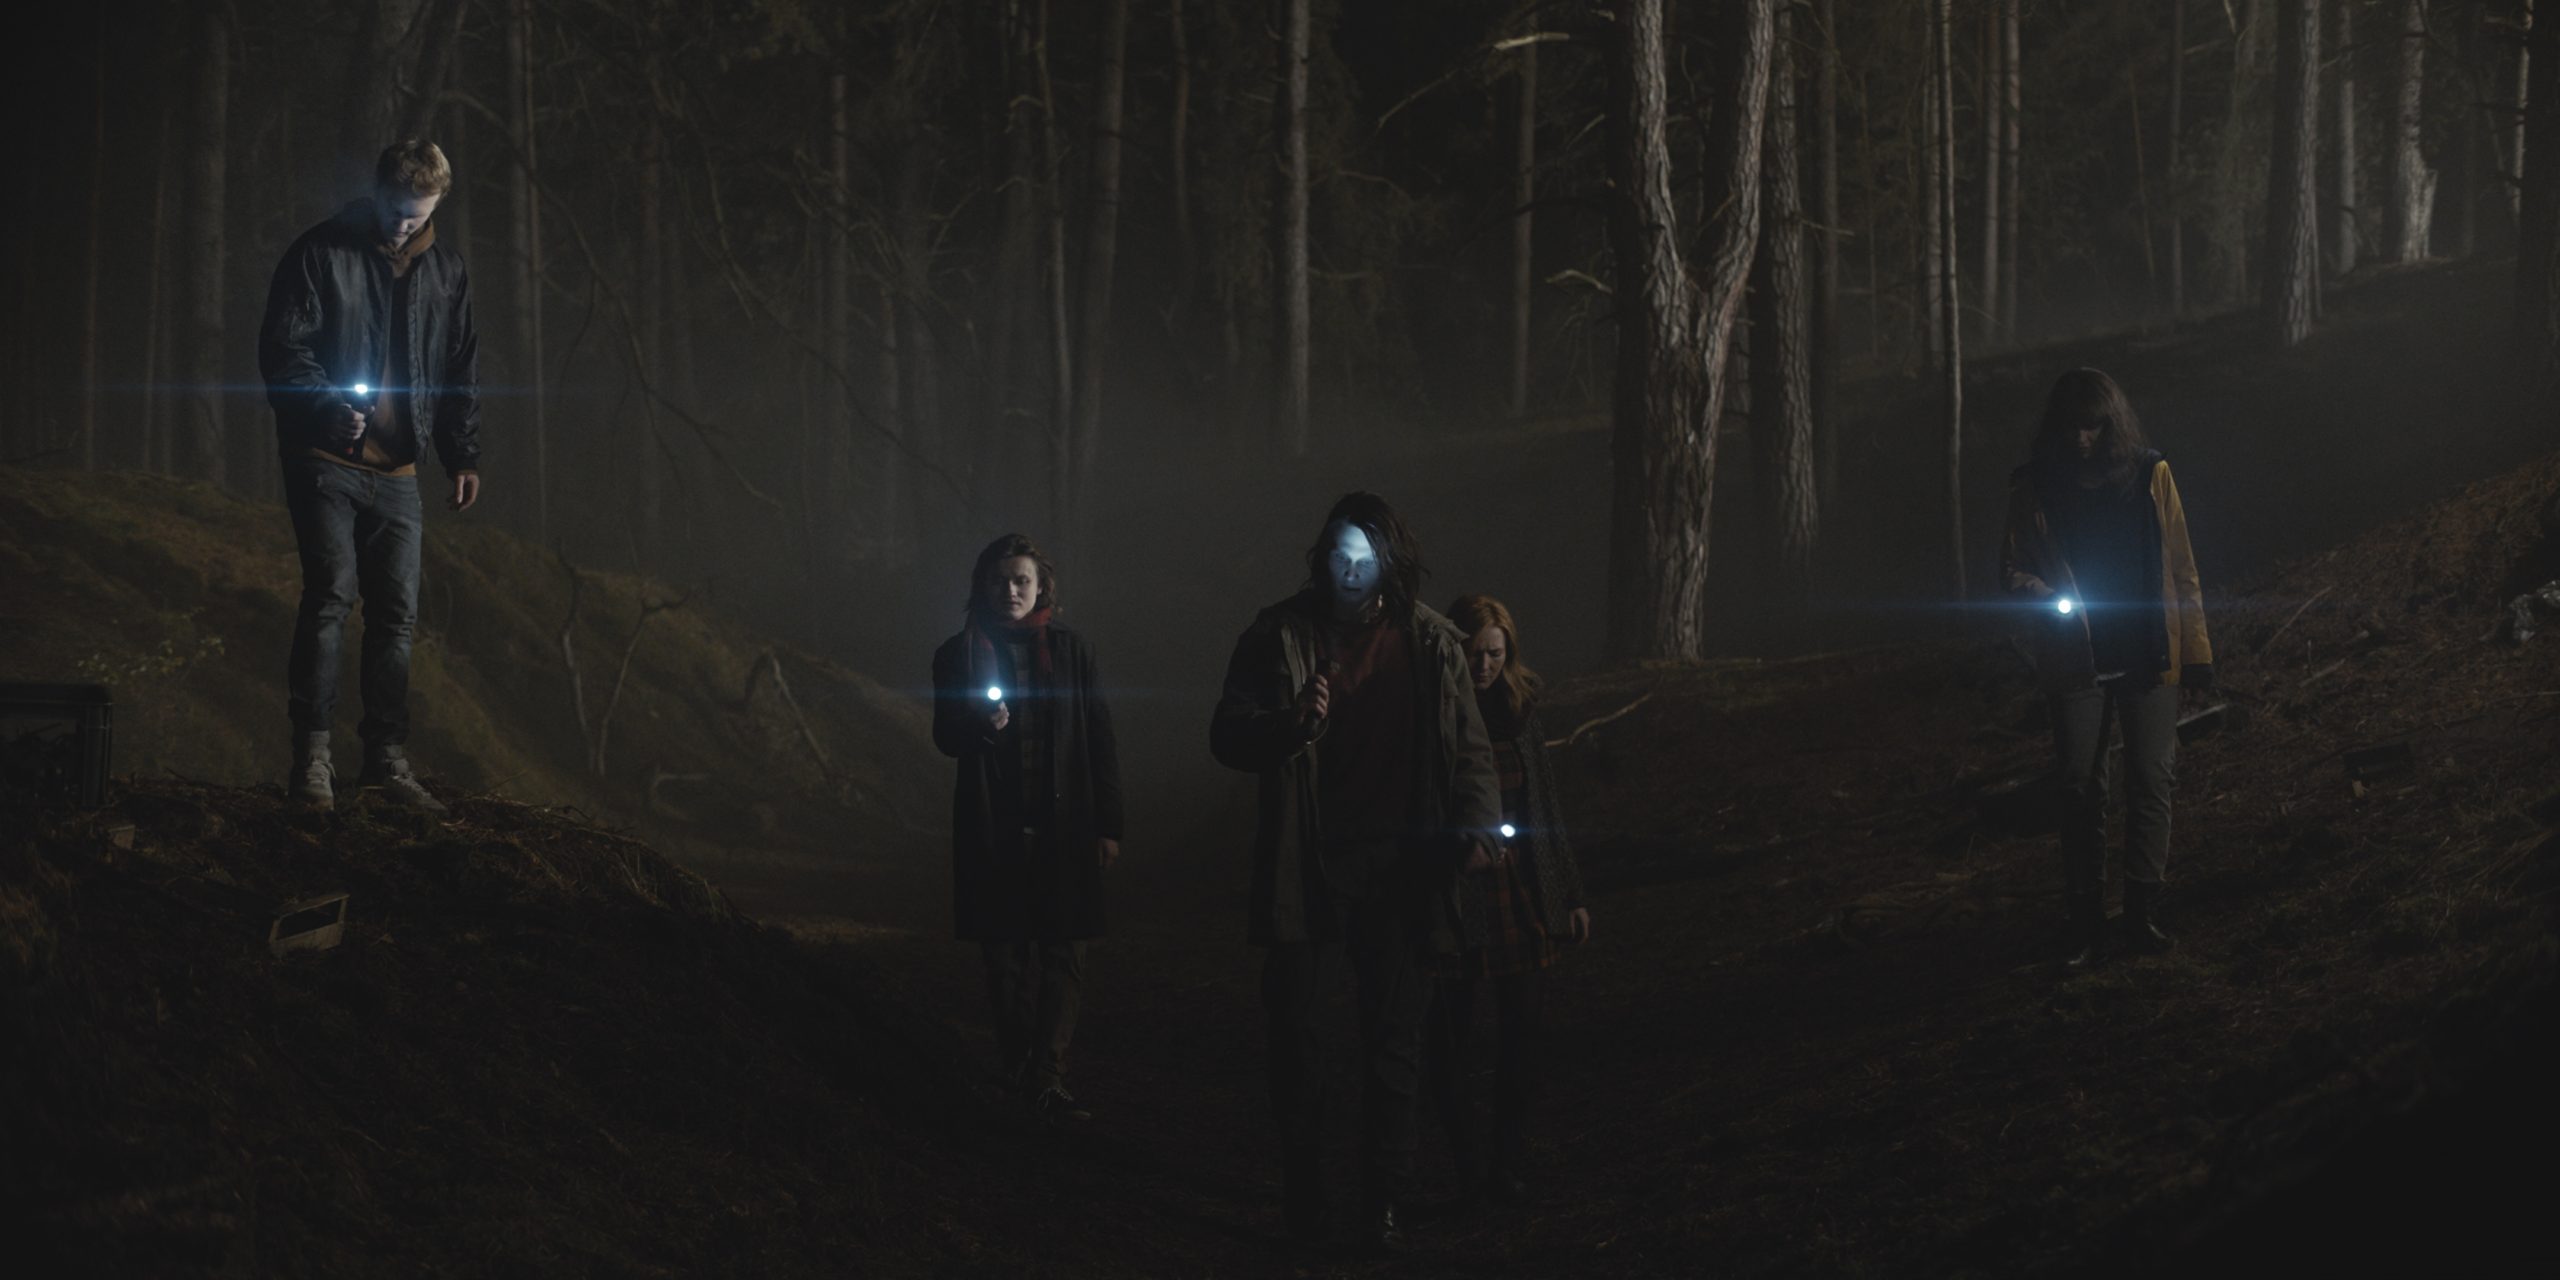 'The Group' in Netflix's Dark,in 2019, searching for the lost Mikkel.